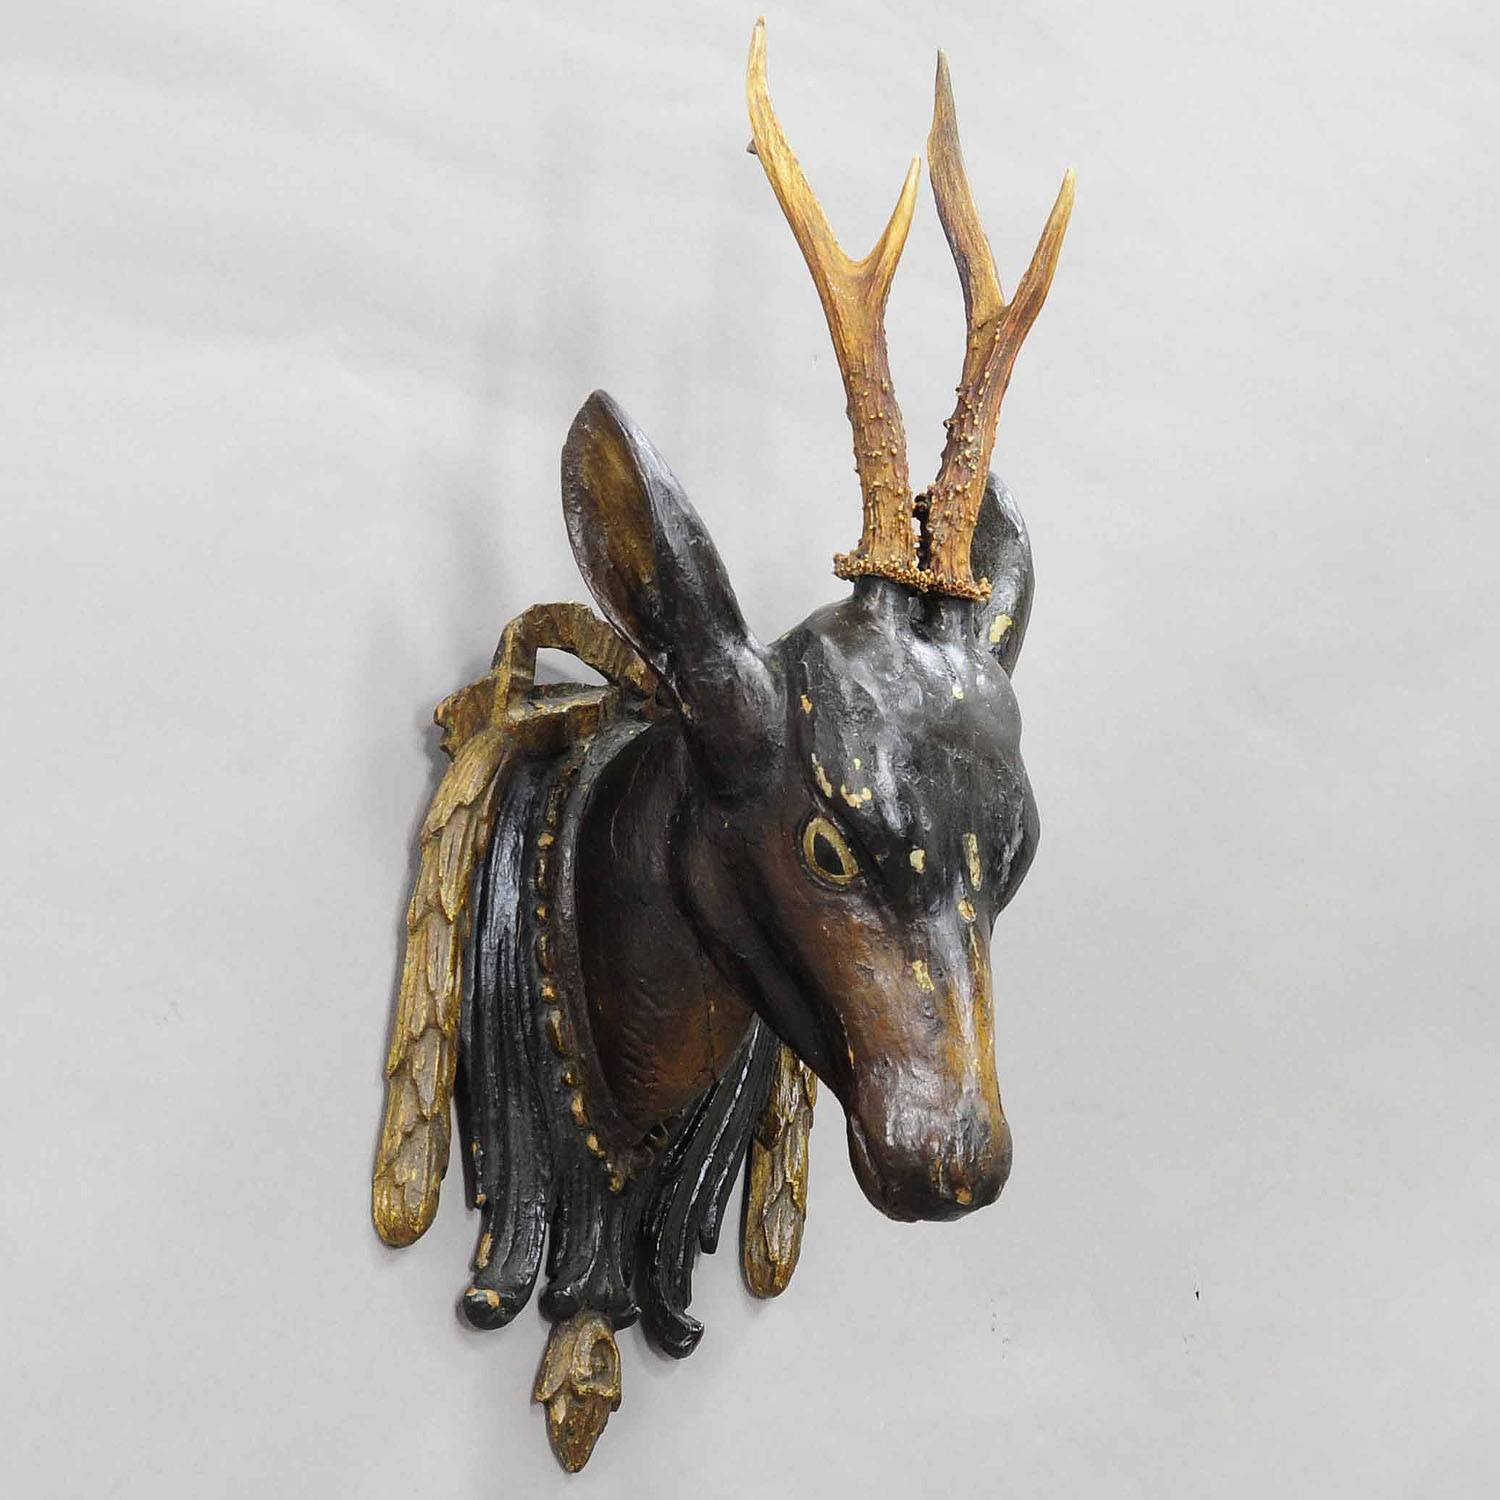 A hand-carved and painted wooden roe deer head with a large deer trophy and great wooden carved plaque executed, circa 1850.